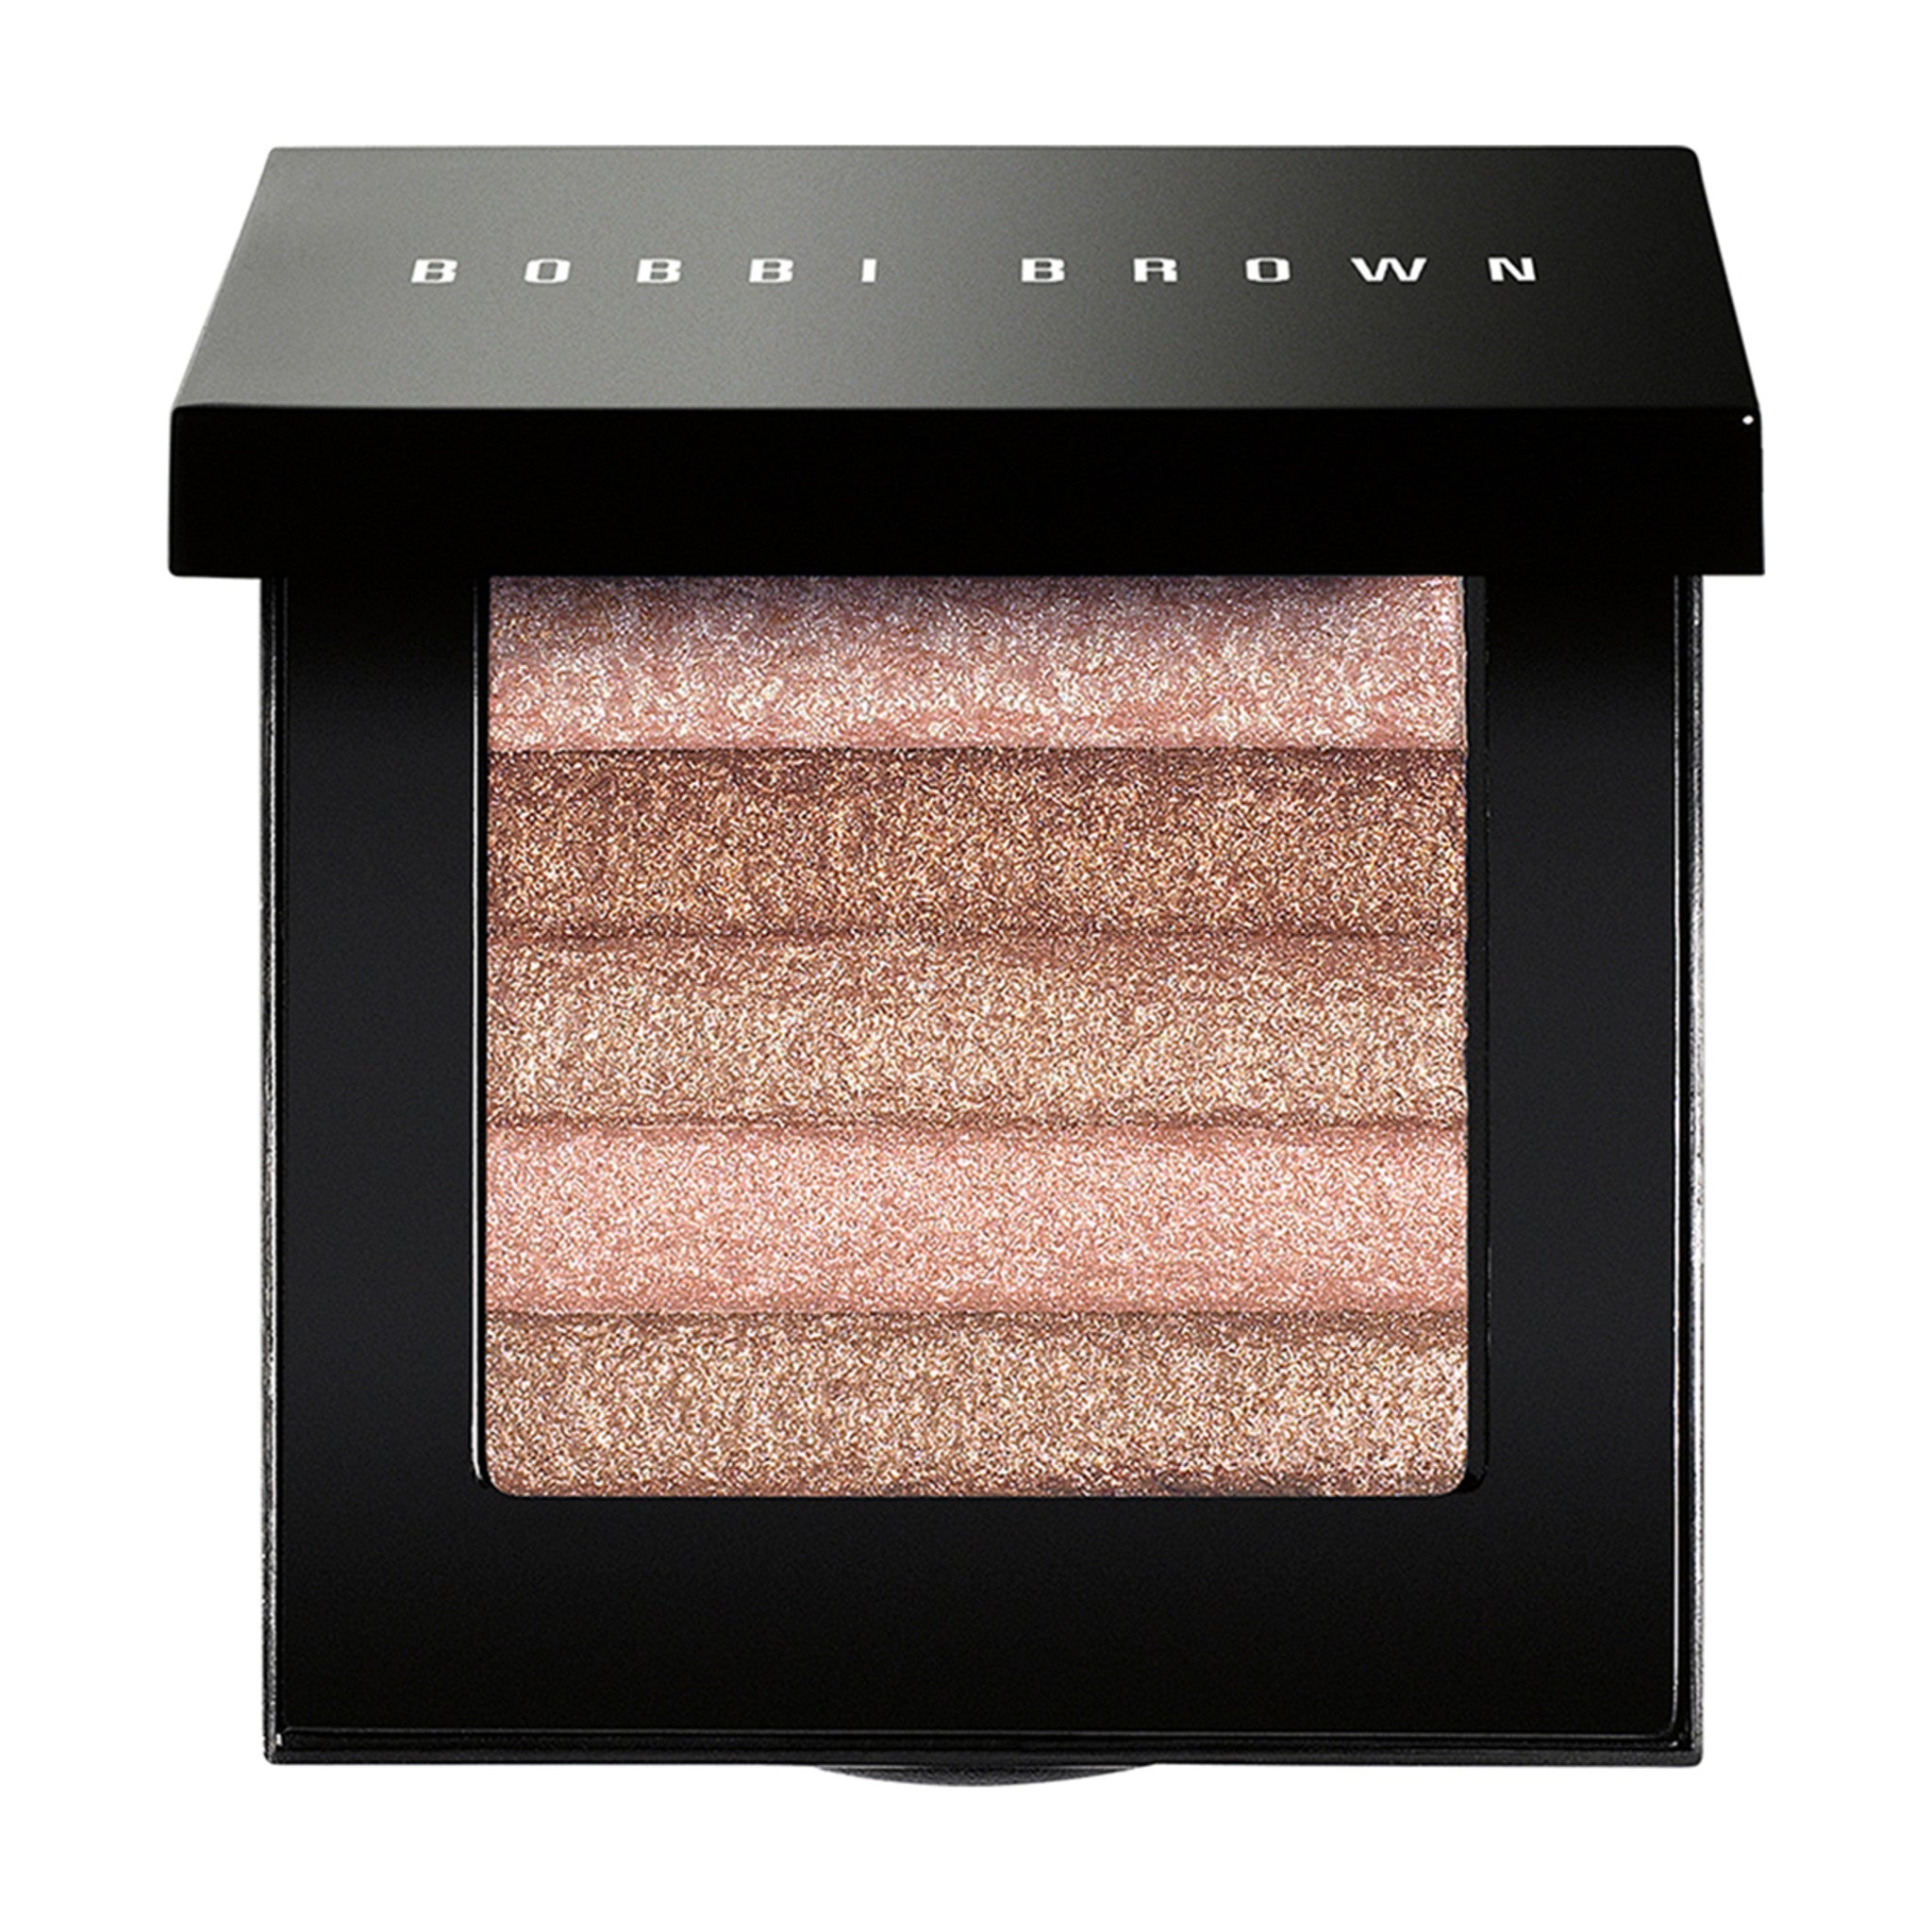 Bobbi Brown Shimmer Brick Compact Color/Shade variant: Pink Quartz main image. This product is in the color pink